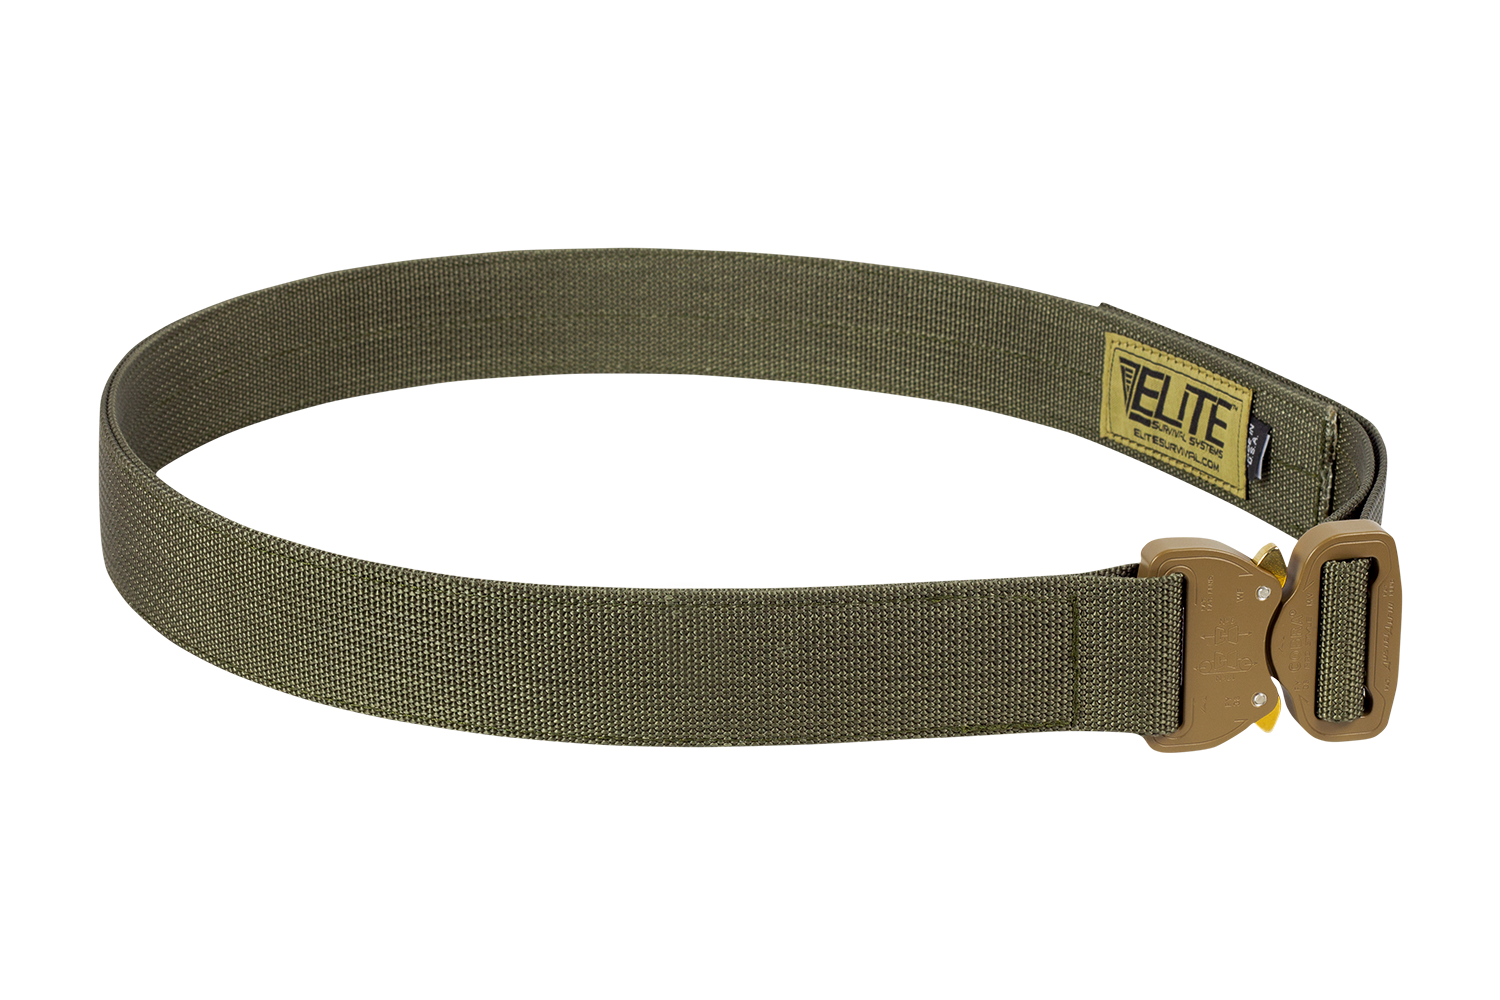 Cobra Buckle Tactical Belt – Lychee the Label